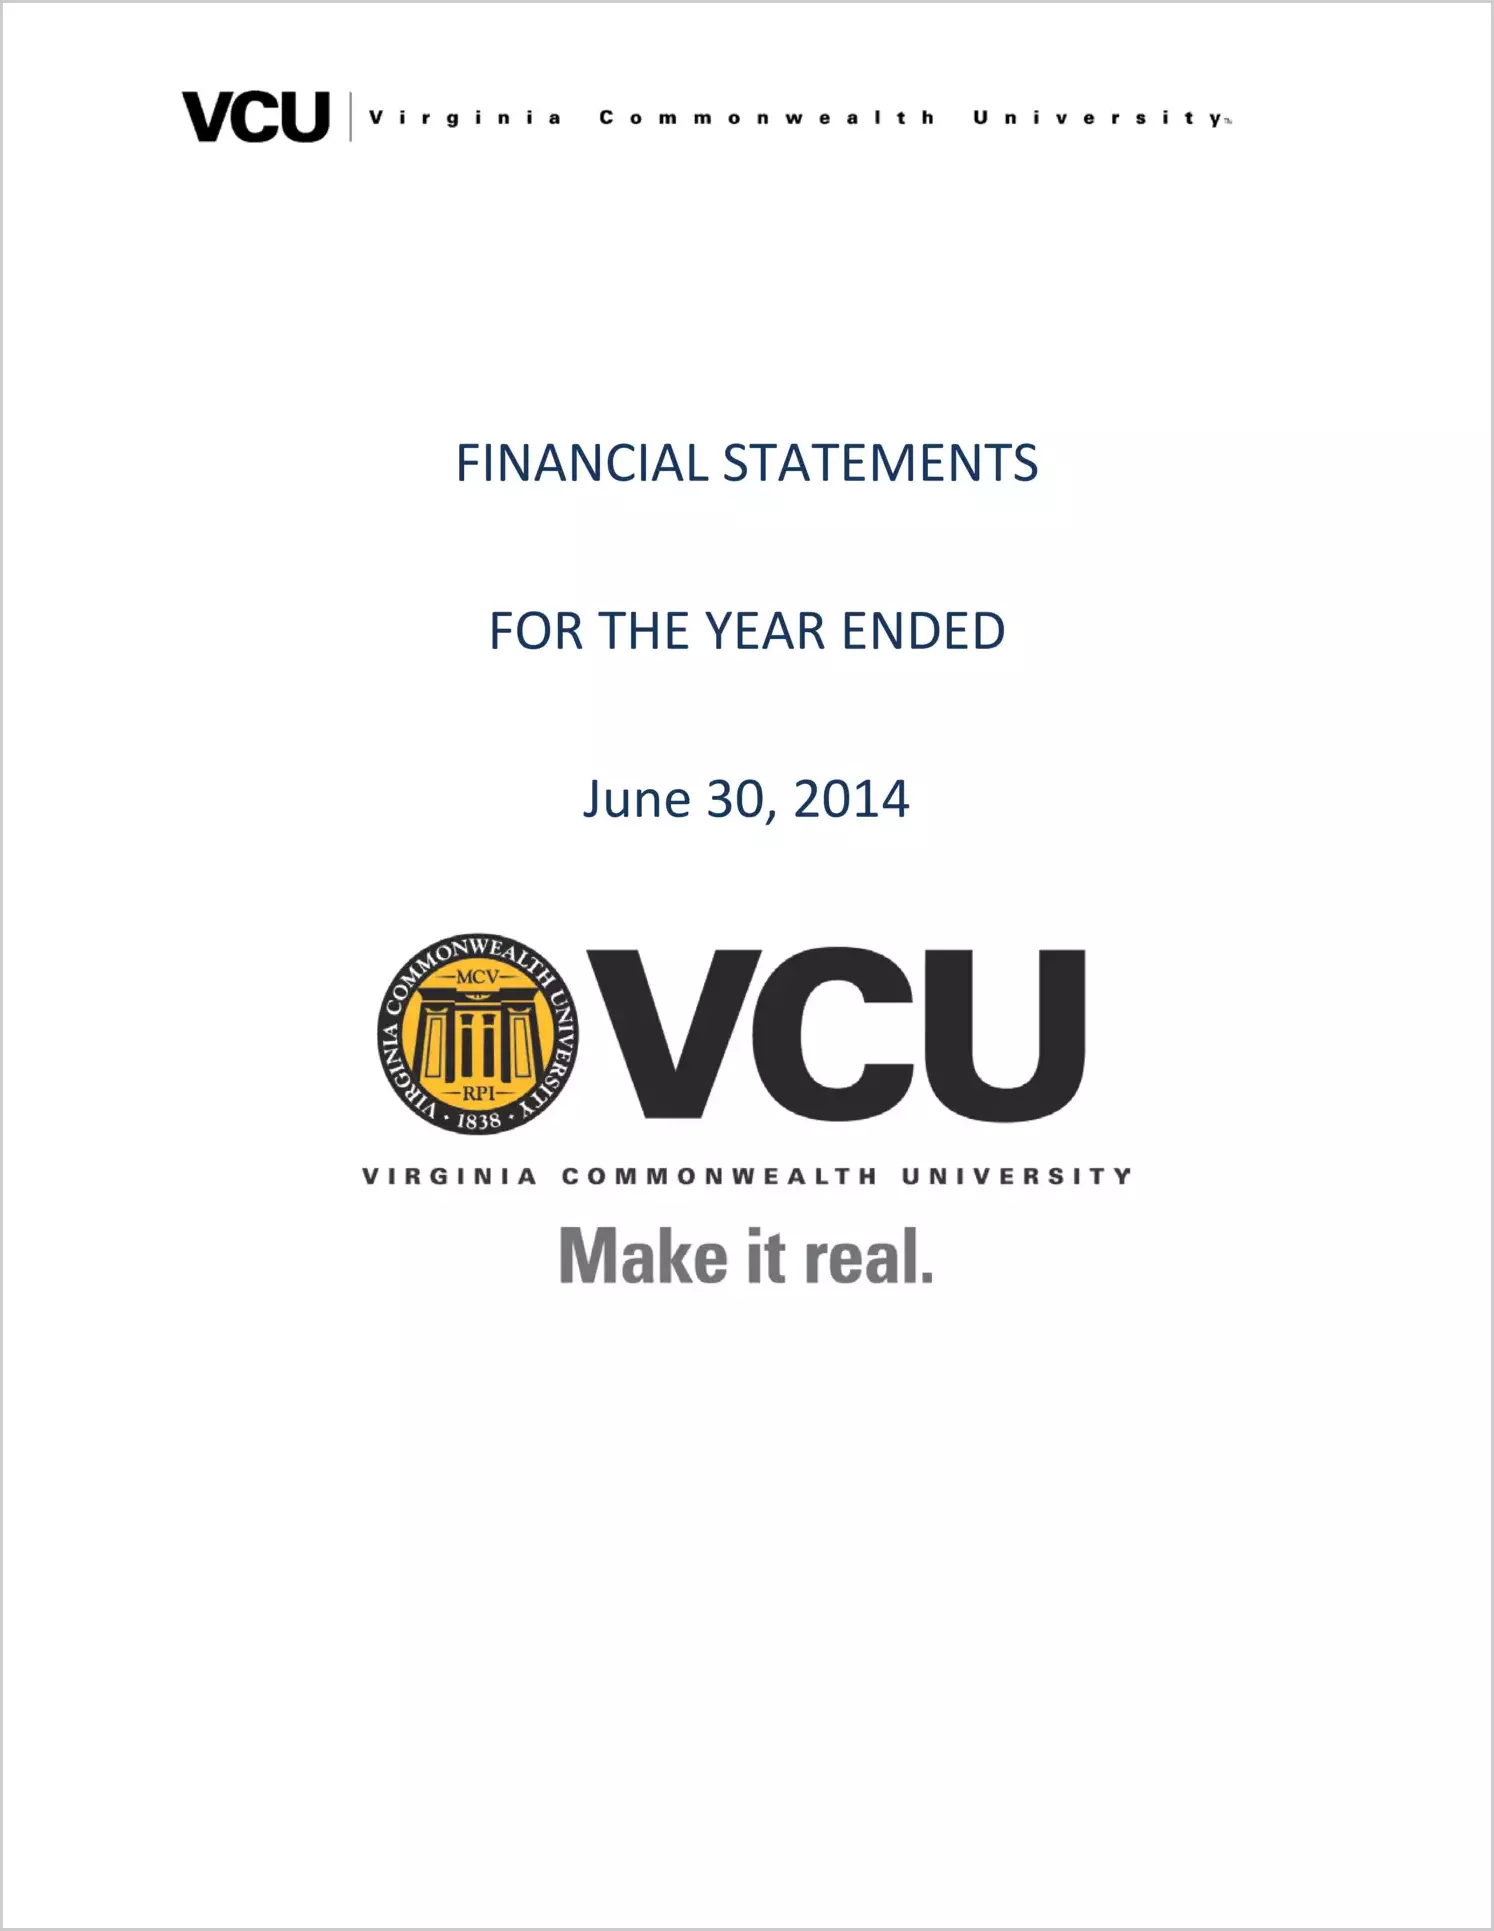 Virginia Commonwealth University Finanical Statements Report for the year ended June 30, 2014